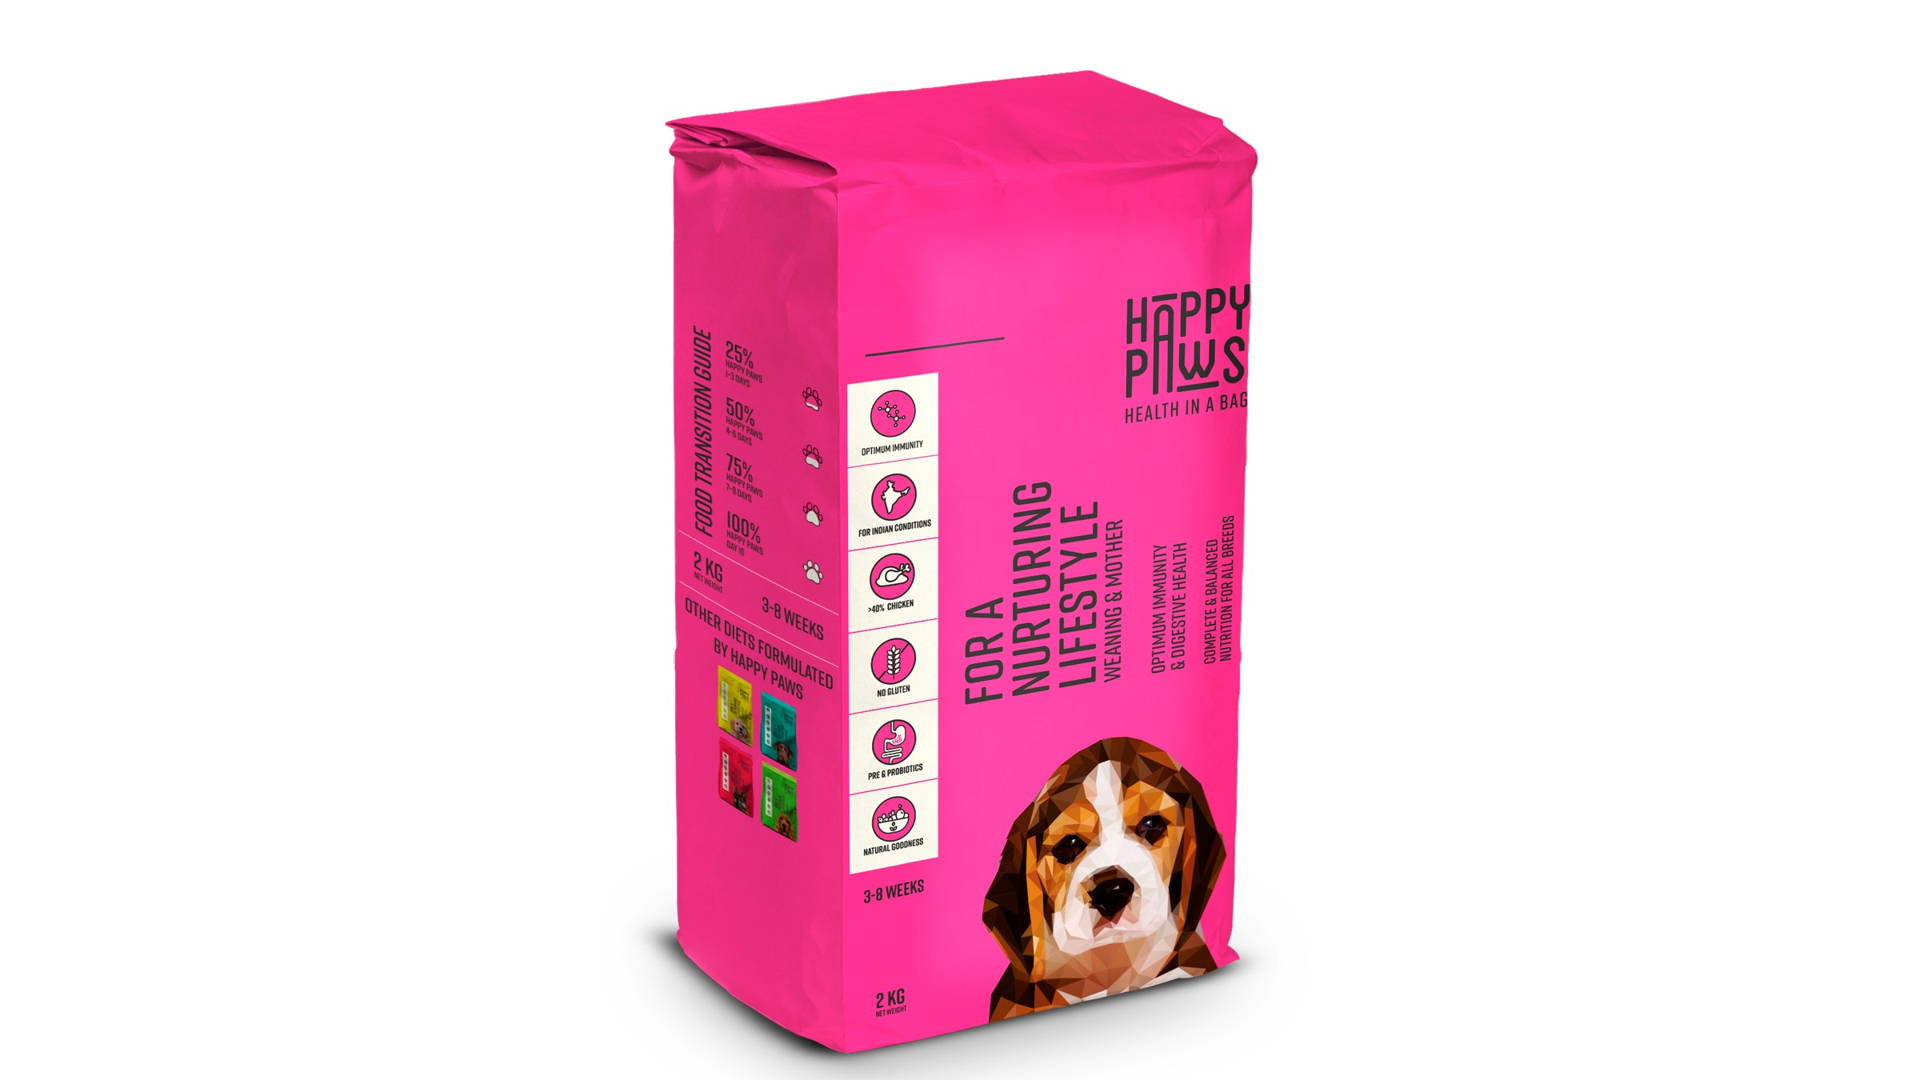 Featured image for Happy Paws is A Natural Pet Food Line With a Colorful Look